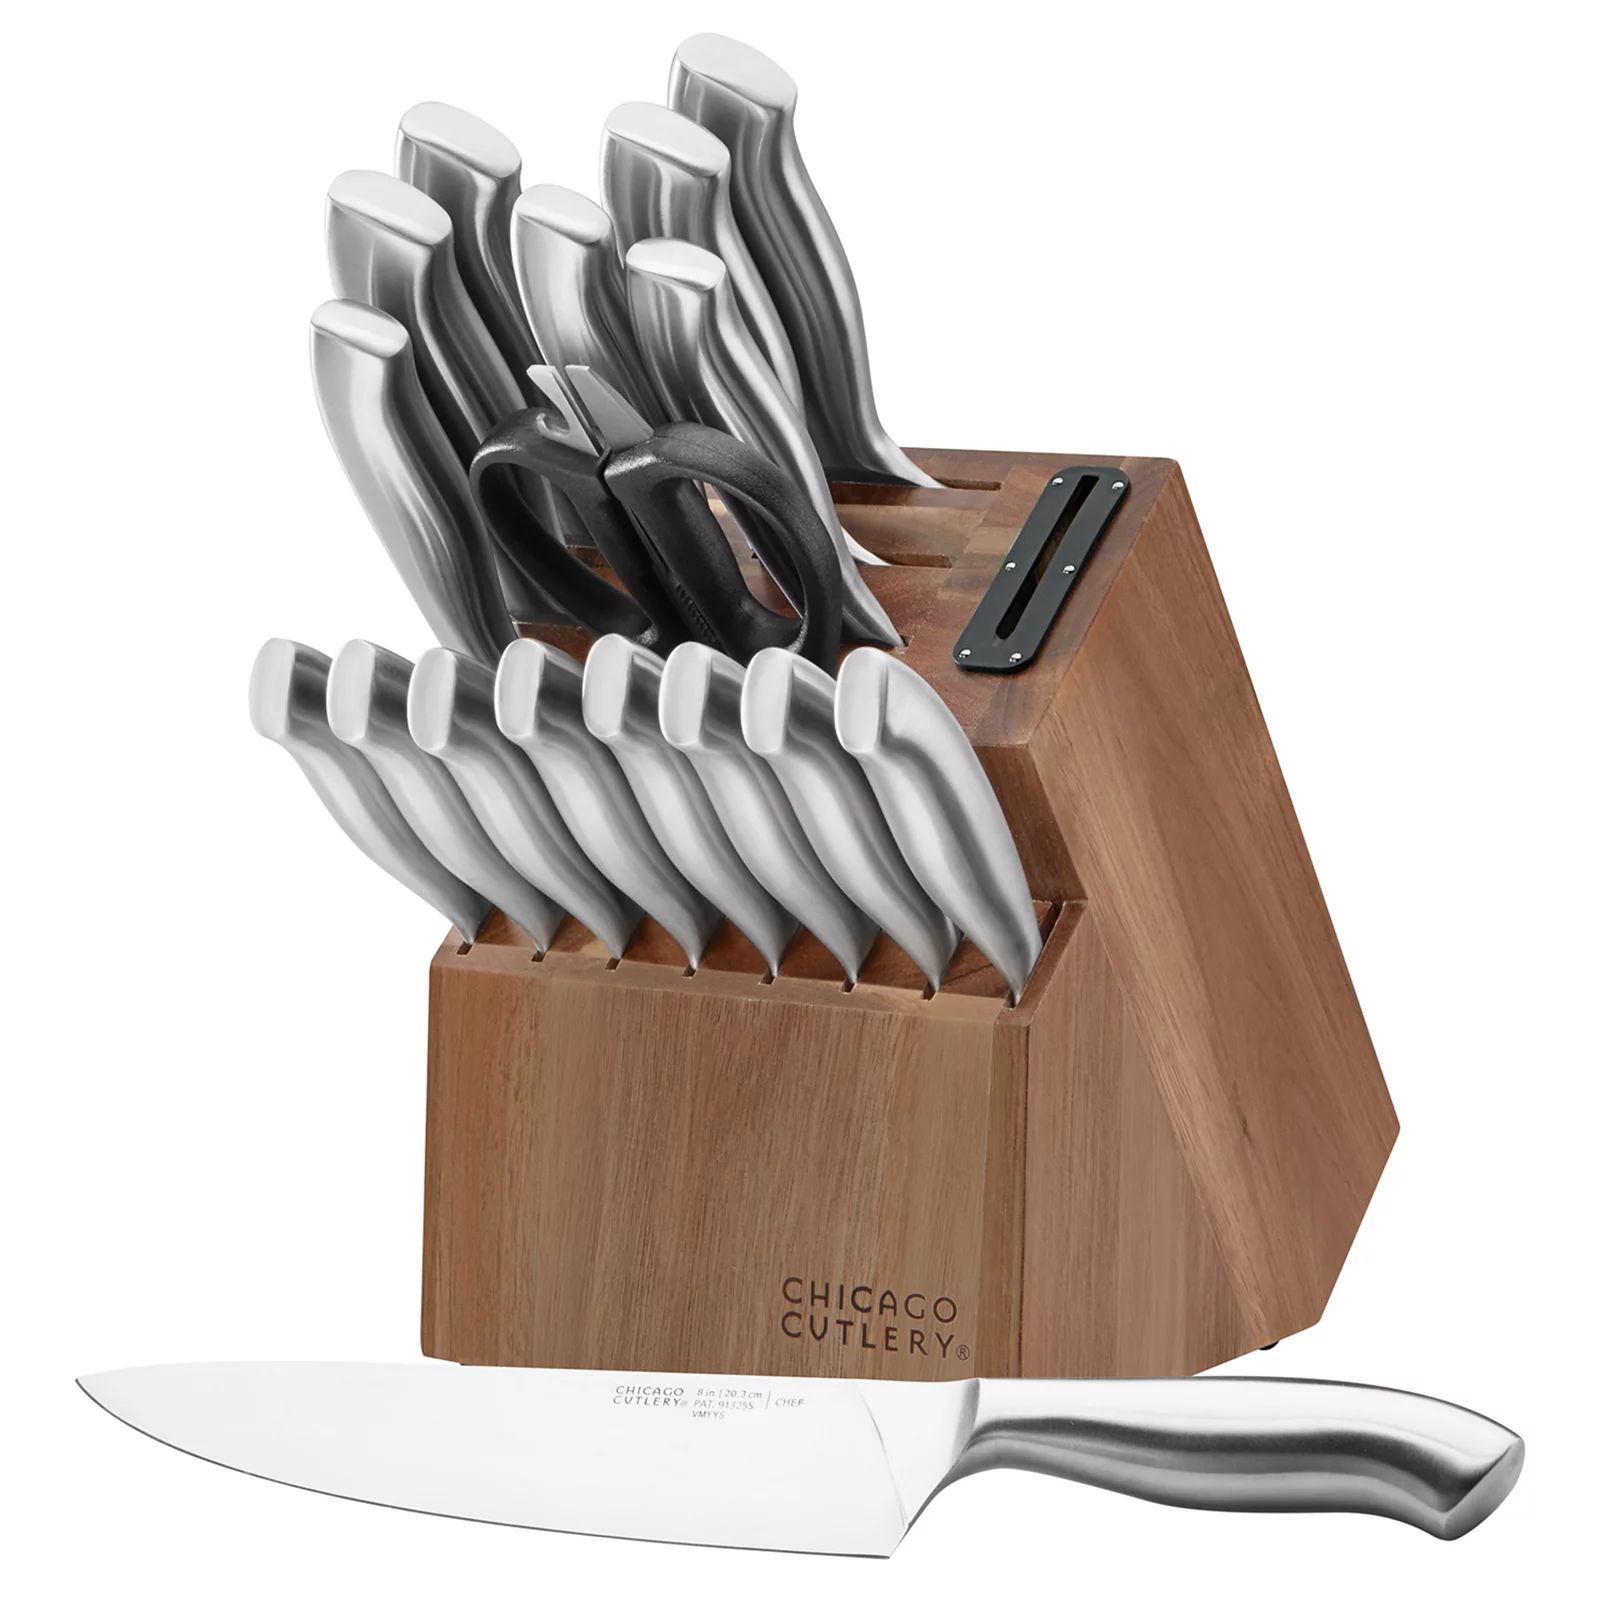 Chicago Cutlery Insignia Steel 18-pc. Guided Grip Block Set, Multicolor | Kohl's